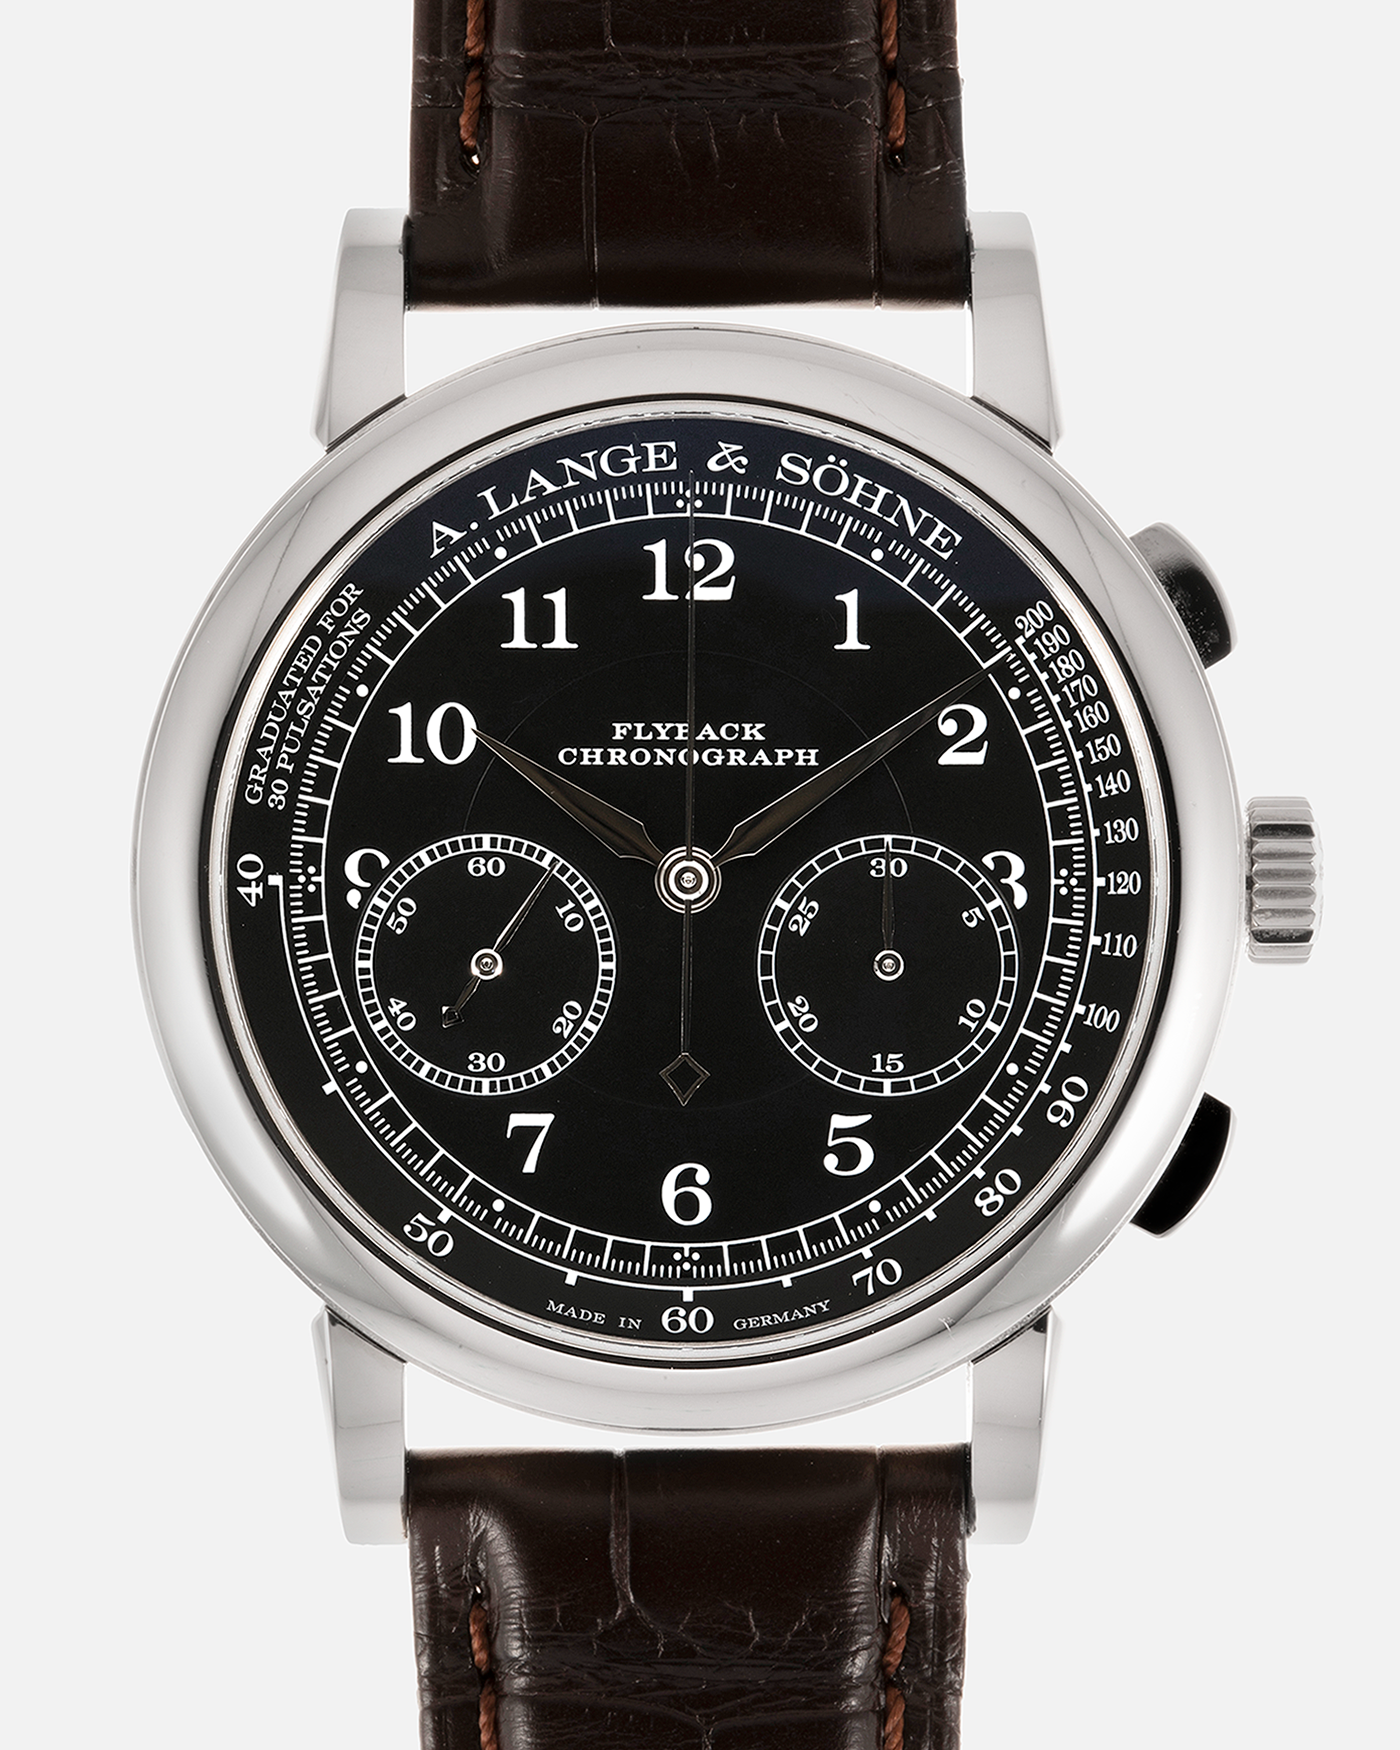 Brand: A. Lange & Söhne Year: 2022 Model: 1815 Chronograph Reference: 414.028 Material: 18-carat White Gold Movement: Cal. L951.5, Manual-Winding Case Diameter: 39.5mm Bracelet/Strap: A. Lange & Söhne Dark Brown Alligator Strap with signed 18-carat White Gold Tang Buckle